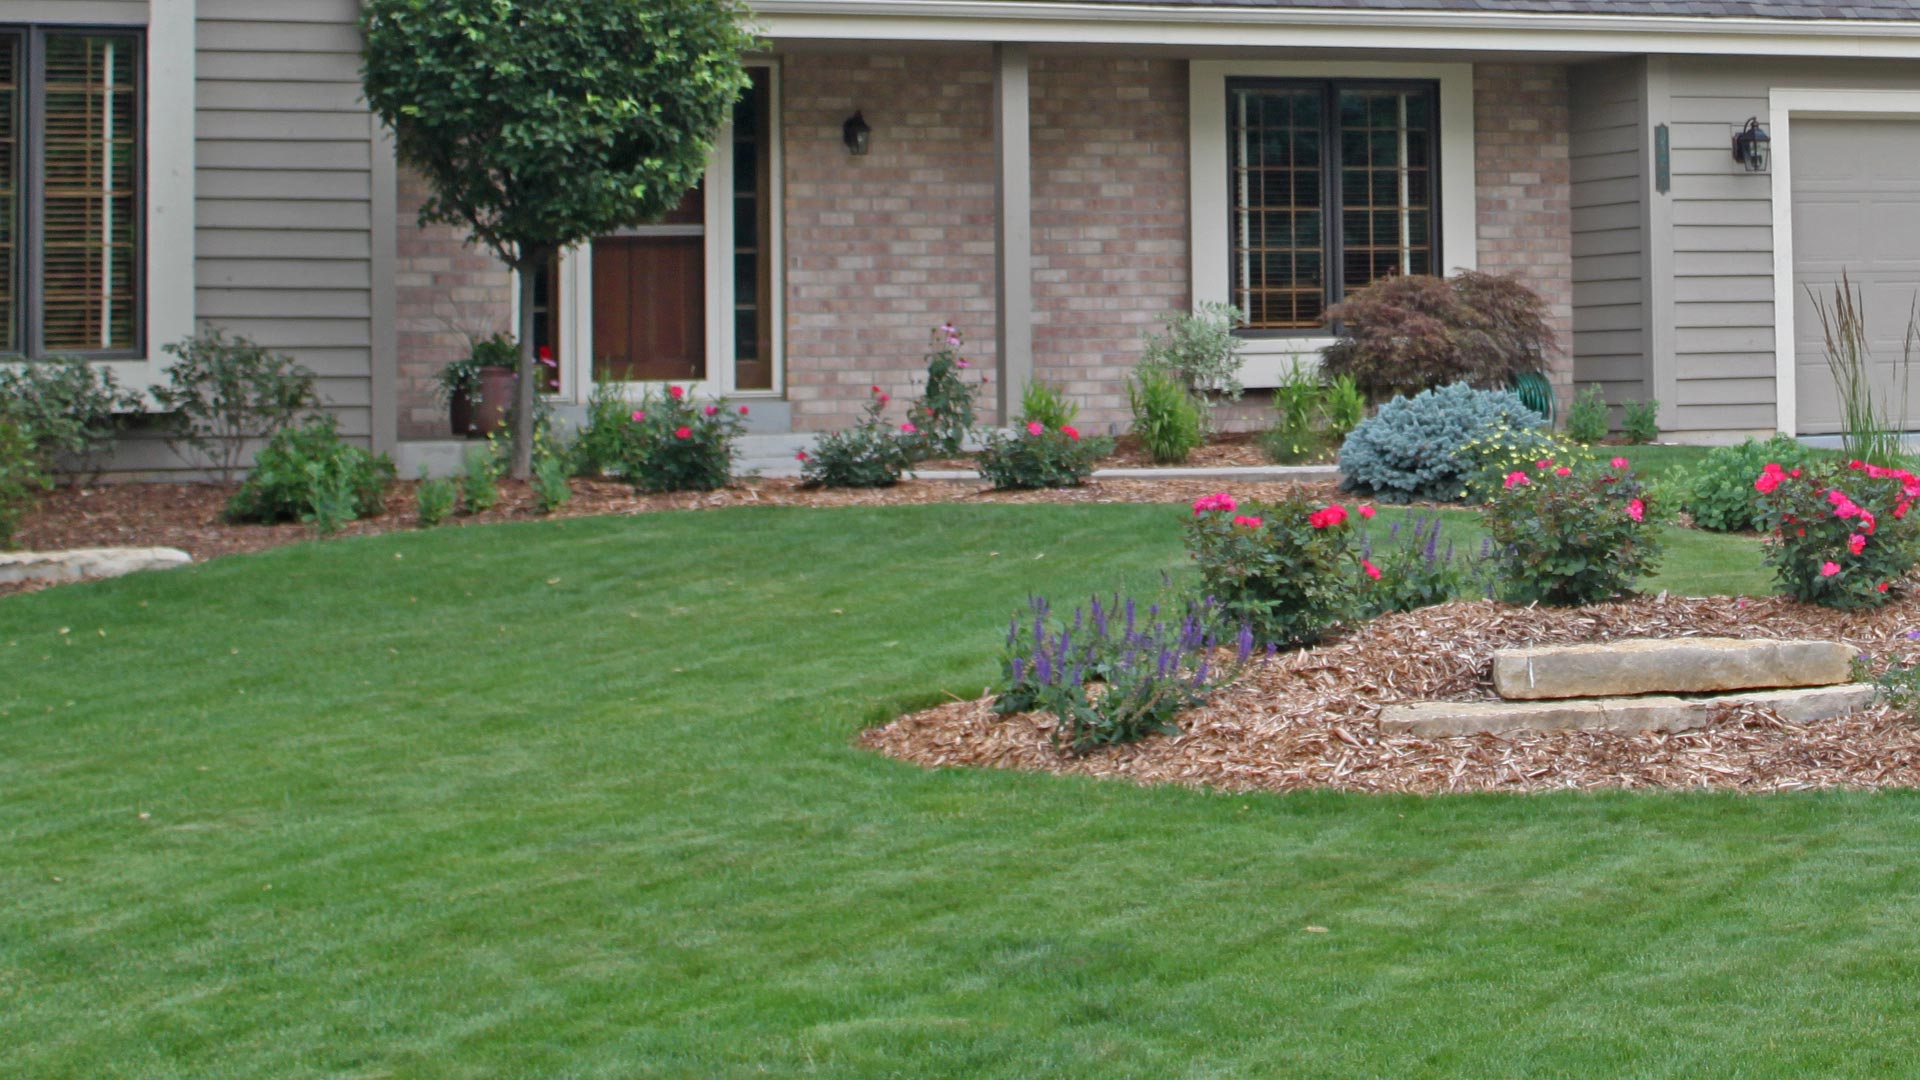 The results of a homeowner's yard receiving the full service package.